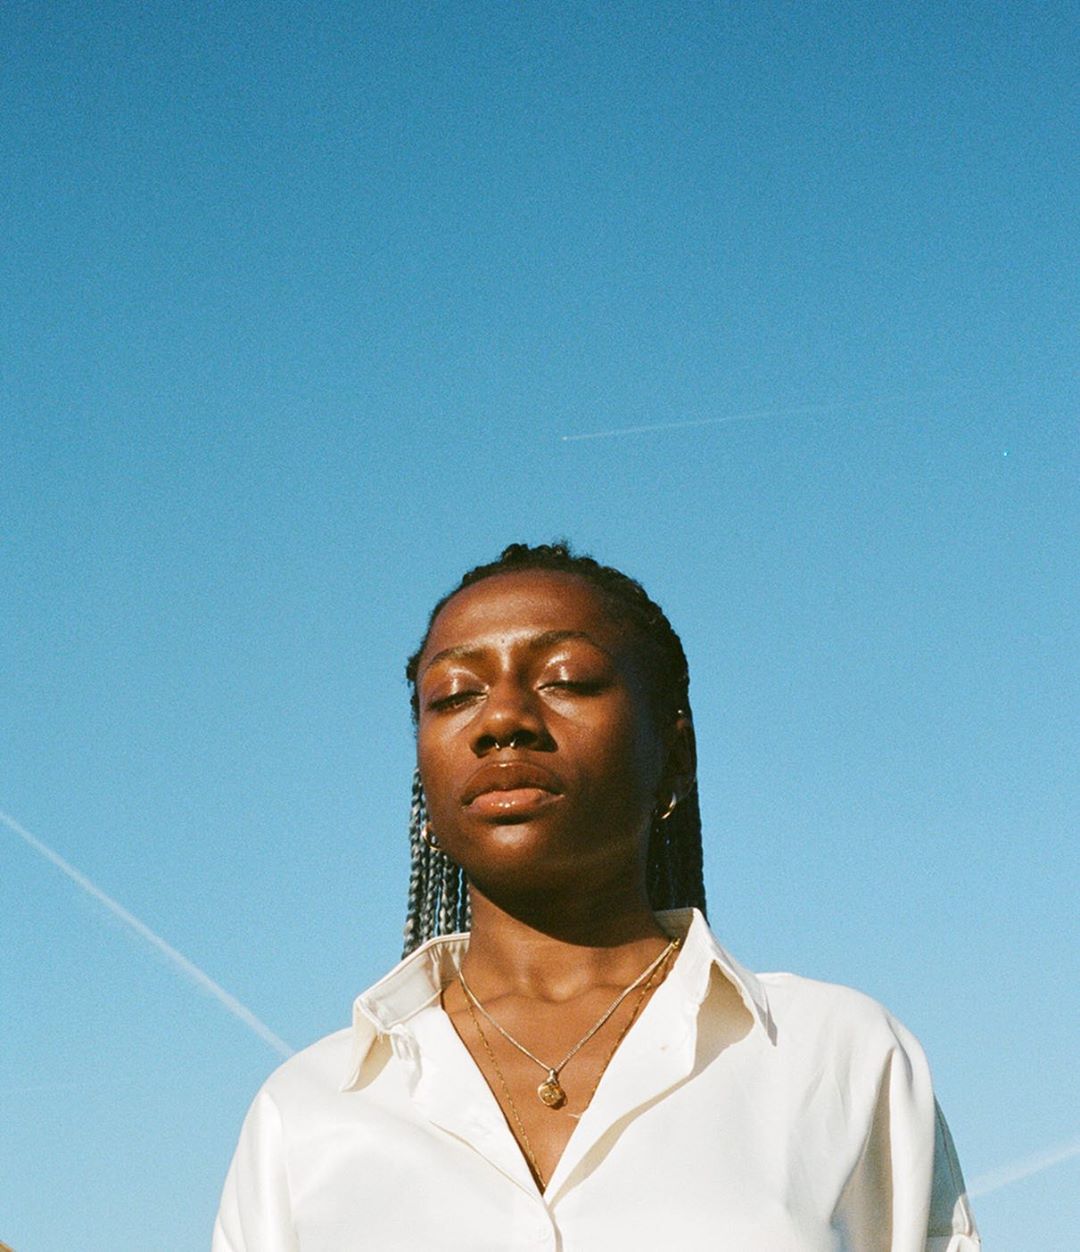 Time to update your playlist? Here’s 7 UK based Black upcoming artists to get to know